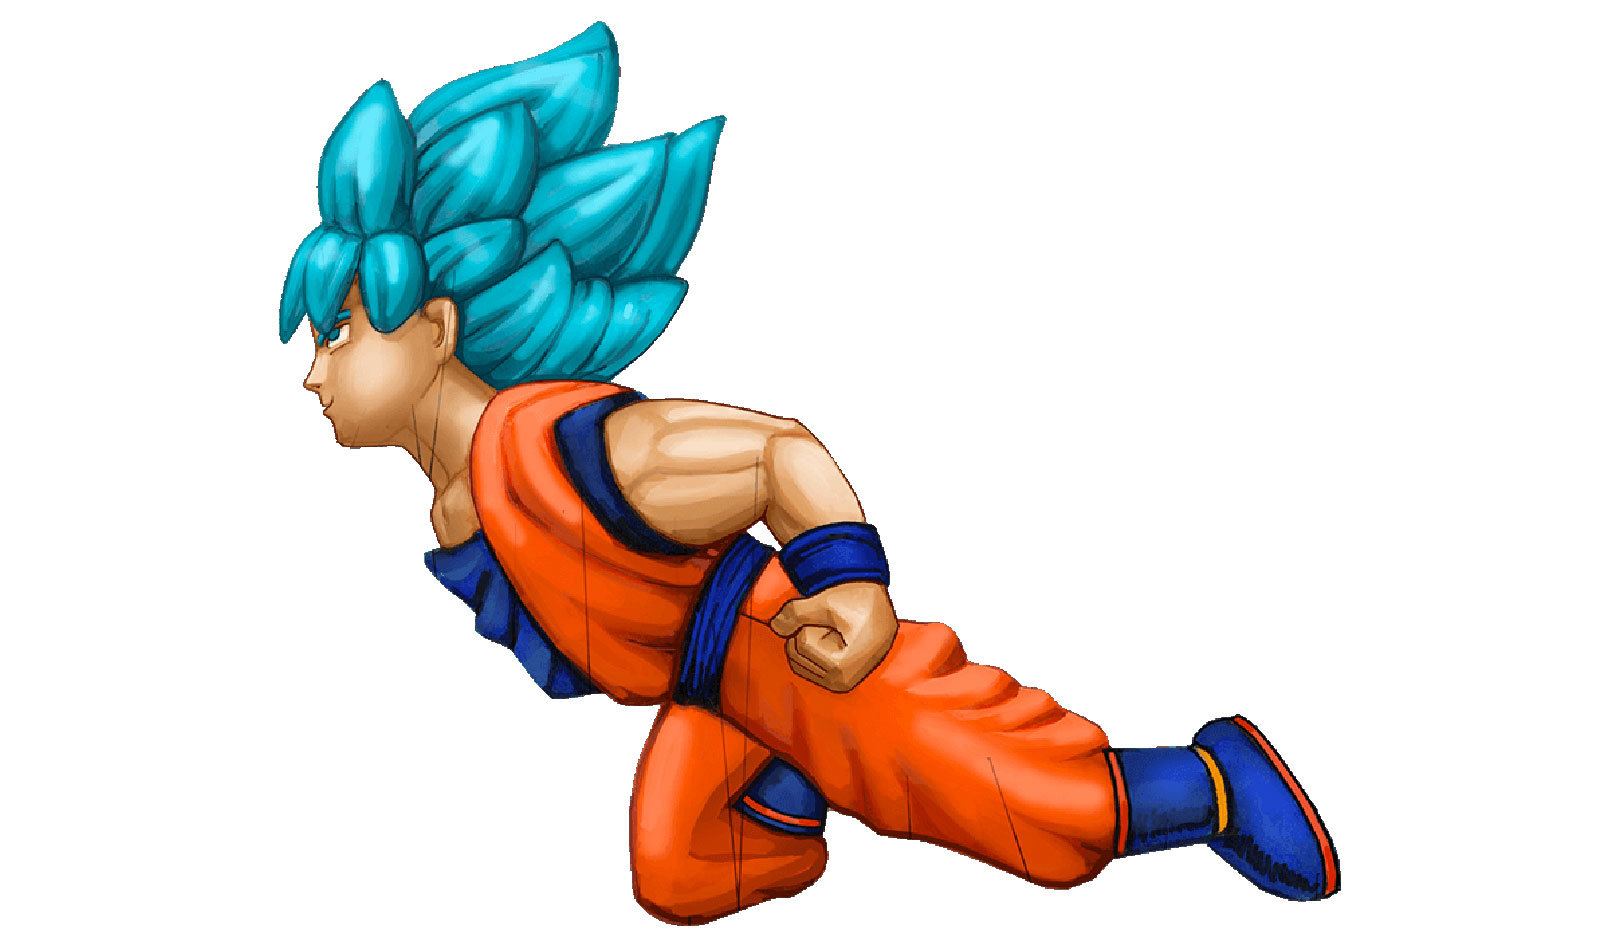 THE MACY’S THANKSGIVING DAY PARADE GOES SUPER WITH THE ADDITION OF GOKU!